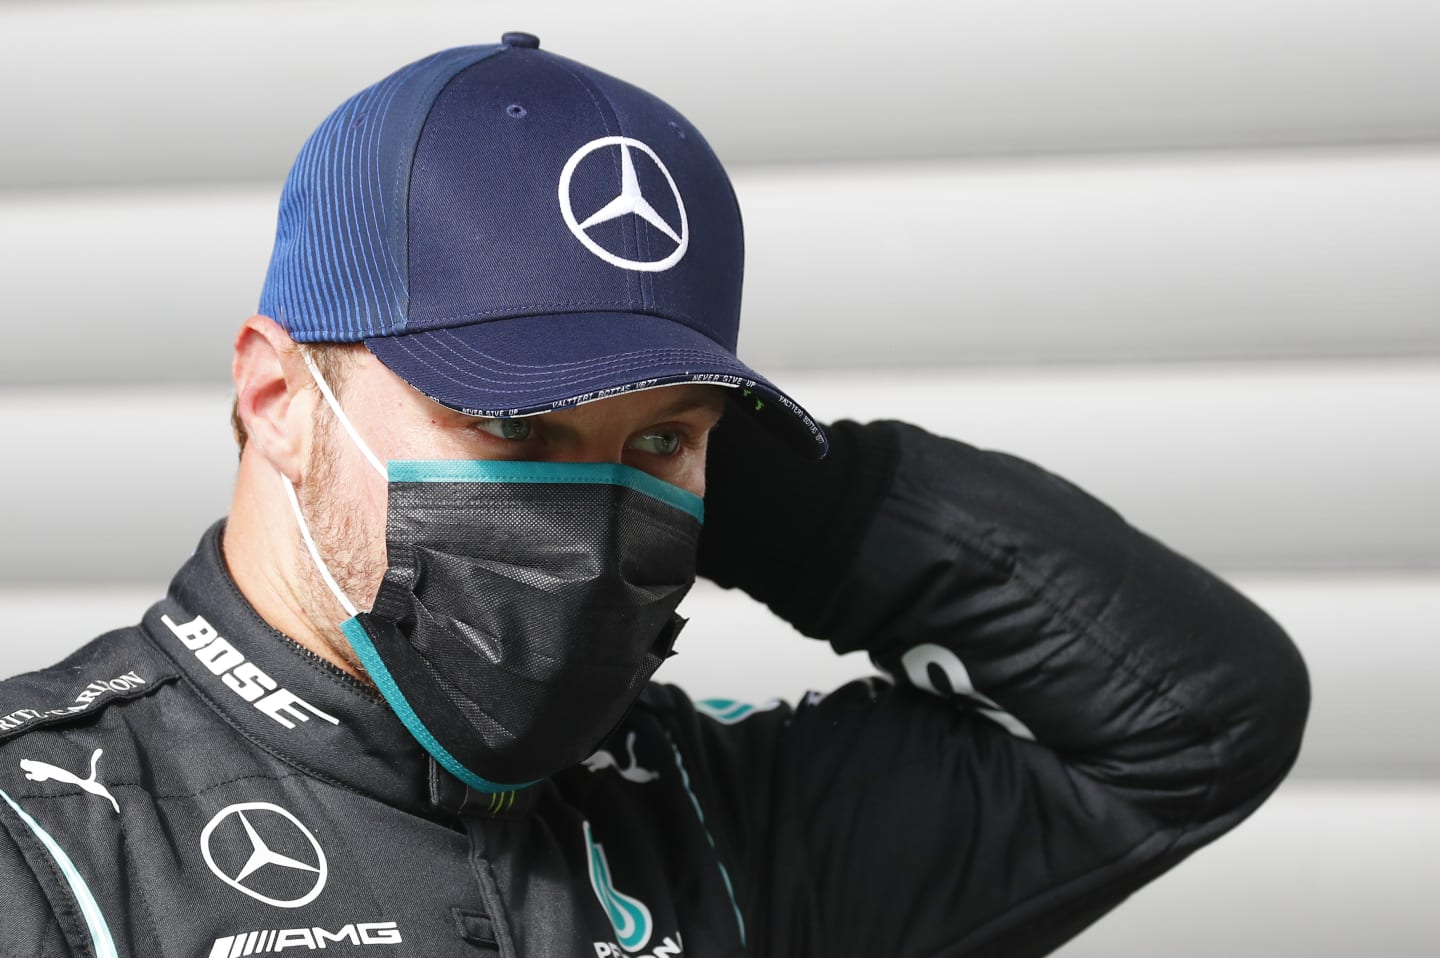 SPA, BELGIUM - AUGUST 29: Second place qualifier Valtteri Bottas of Finland and Mercedes GP looks on in parc ferme during qualifying for the F1 Grand Prix of Belgium at Circuit de Spa-Francorchamps on August 29, 2020 in Spa, Belgium. (Photo by Francois Lenoir/Pool via Getty Images)